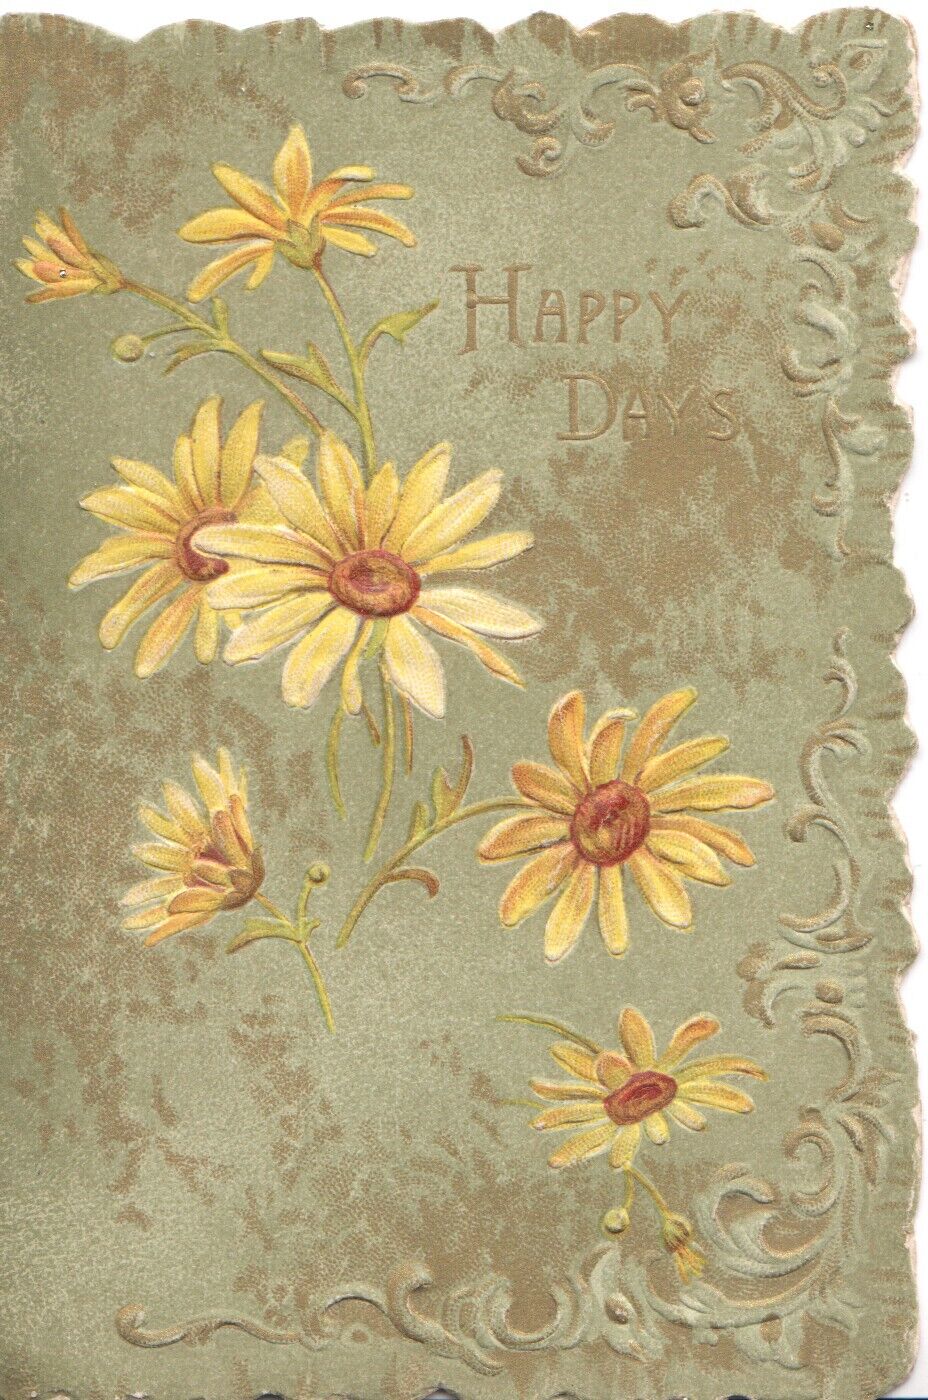 Sunflowers, or daisies, HAPPY DAYS, New Year, Victorian, R. Tuck die cut card